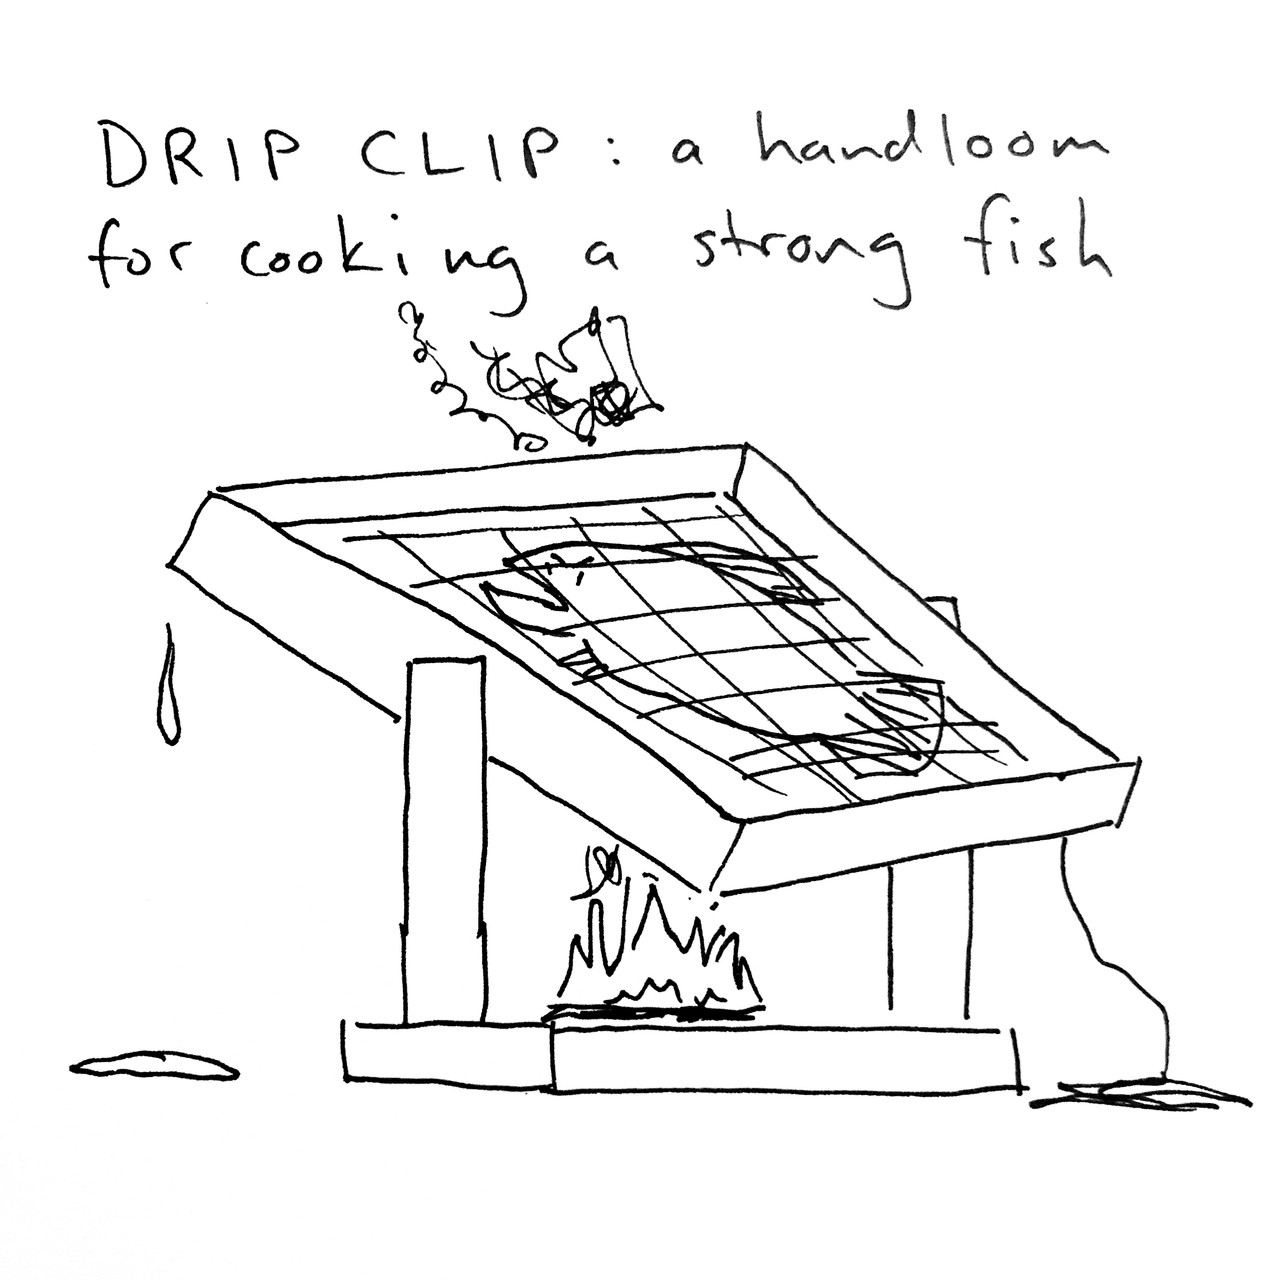 DRIP CLIP: a hand loom for cooking a strong fish. A drawing of a small loom holding a fish on top of a flaming cooktop.